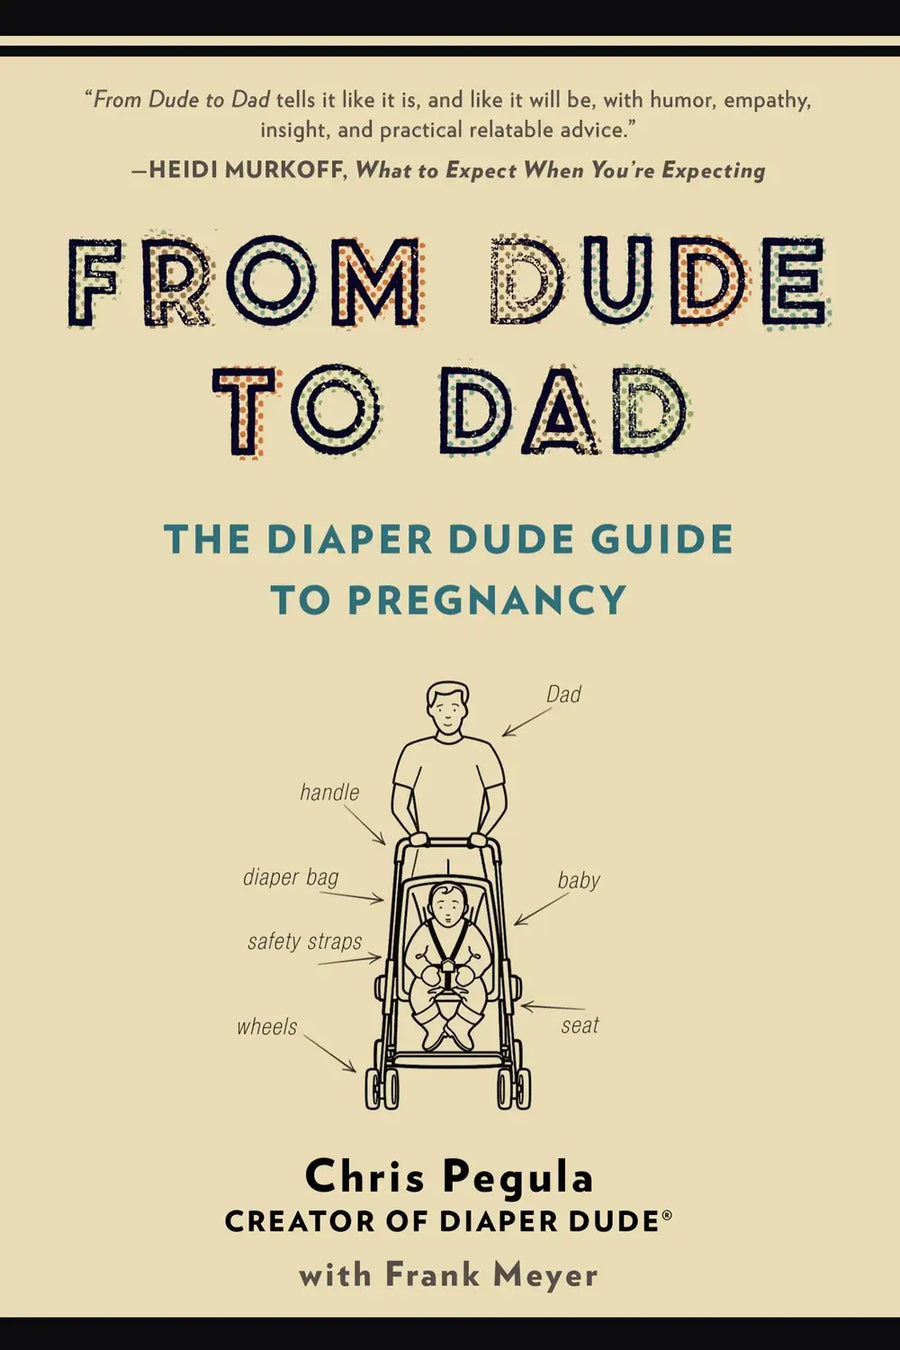 From Dude To Dad:The Diaper Dude Guide To Pregnancy